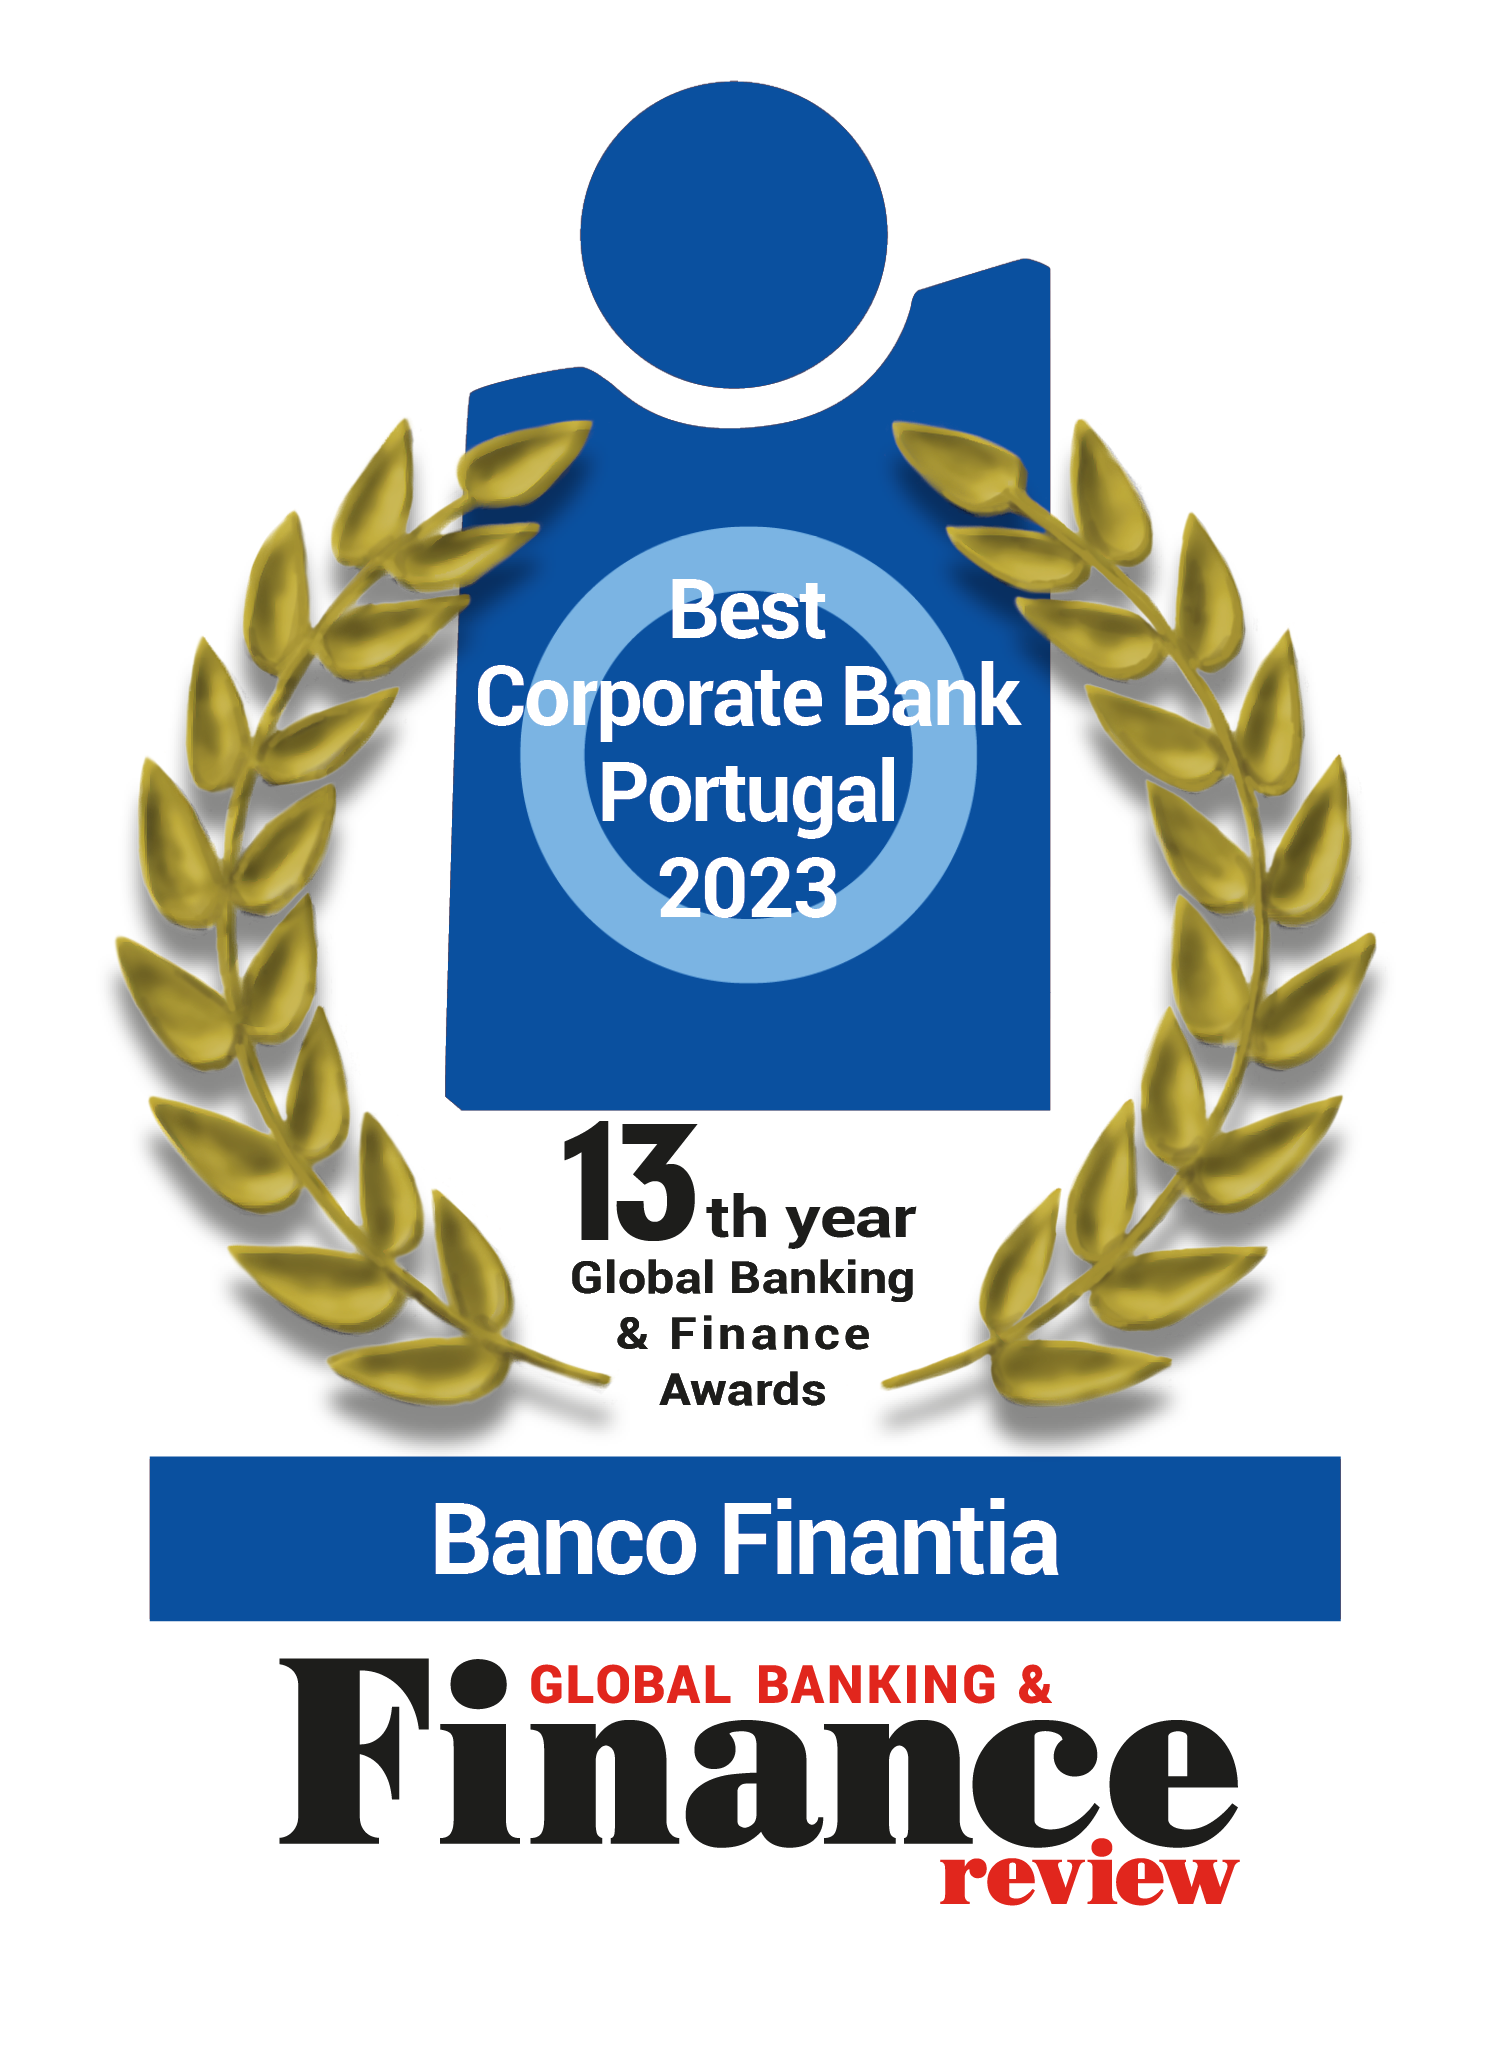 Best Corporate Bank Portugal 2022